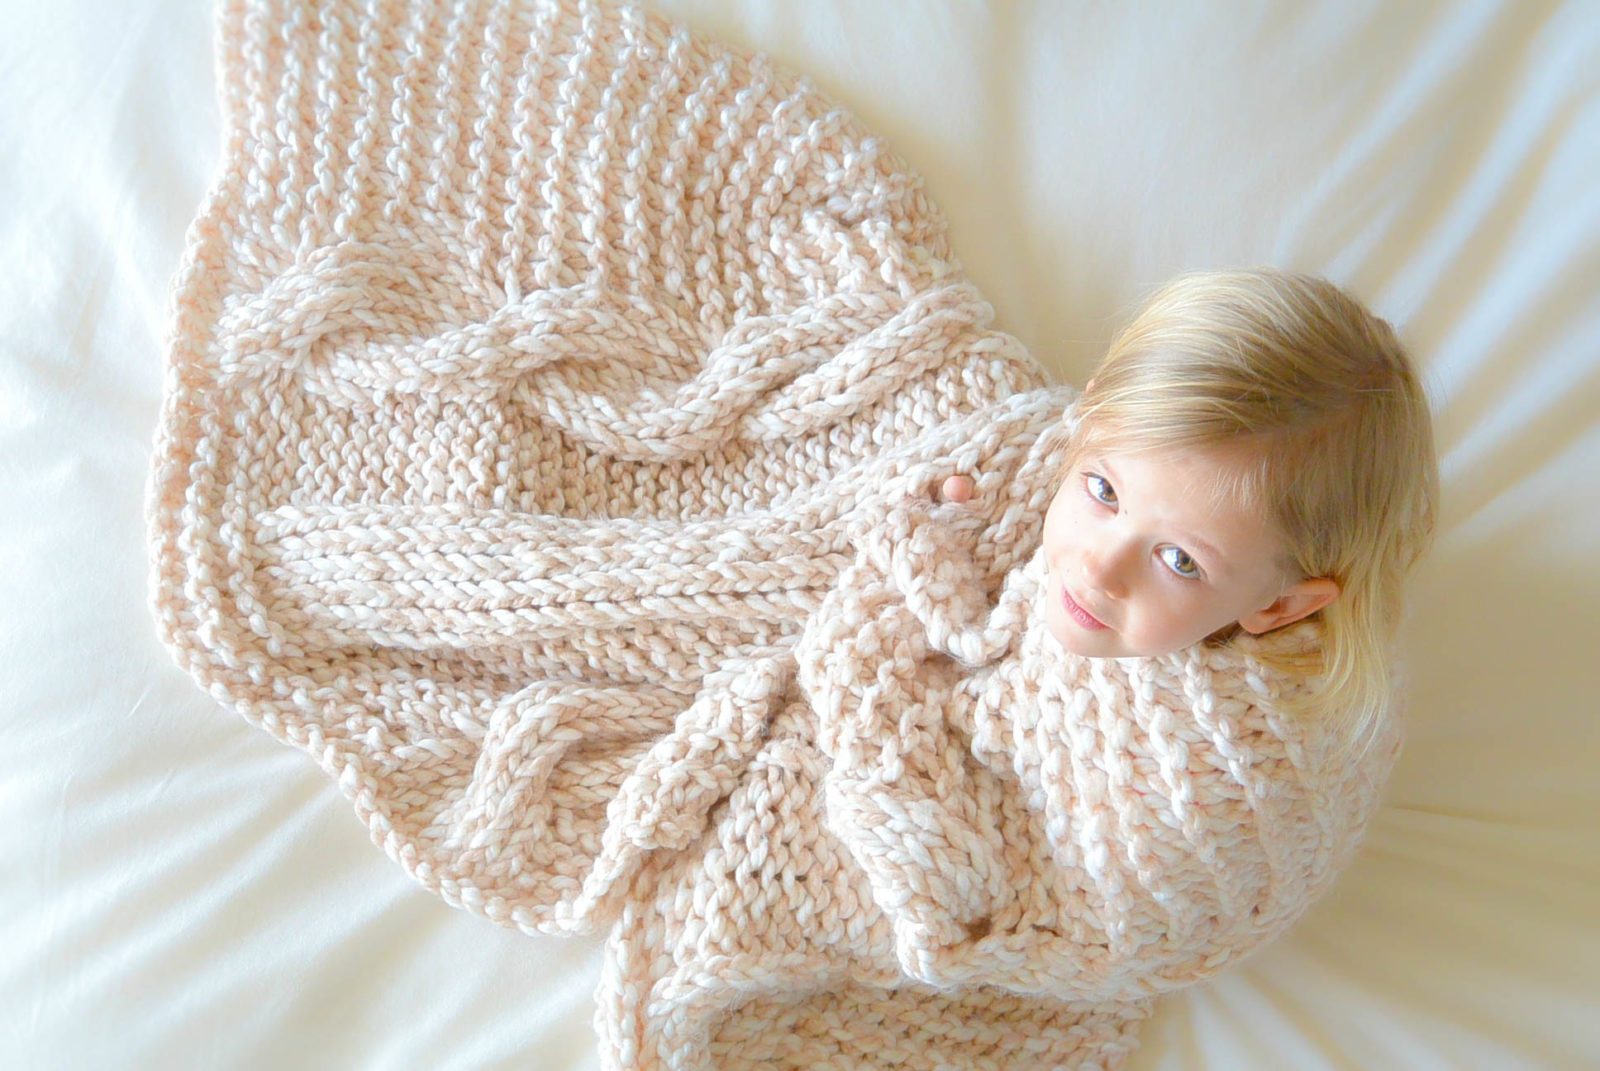 Free knitting pattern for Big Cables Throw afghan in super bulky yarn   Super bulky yarn knitting patterns, Knit afghan patterns, Knitted afghans